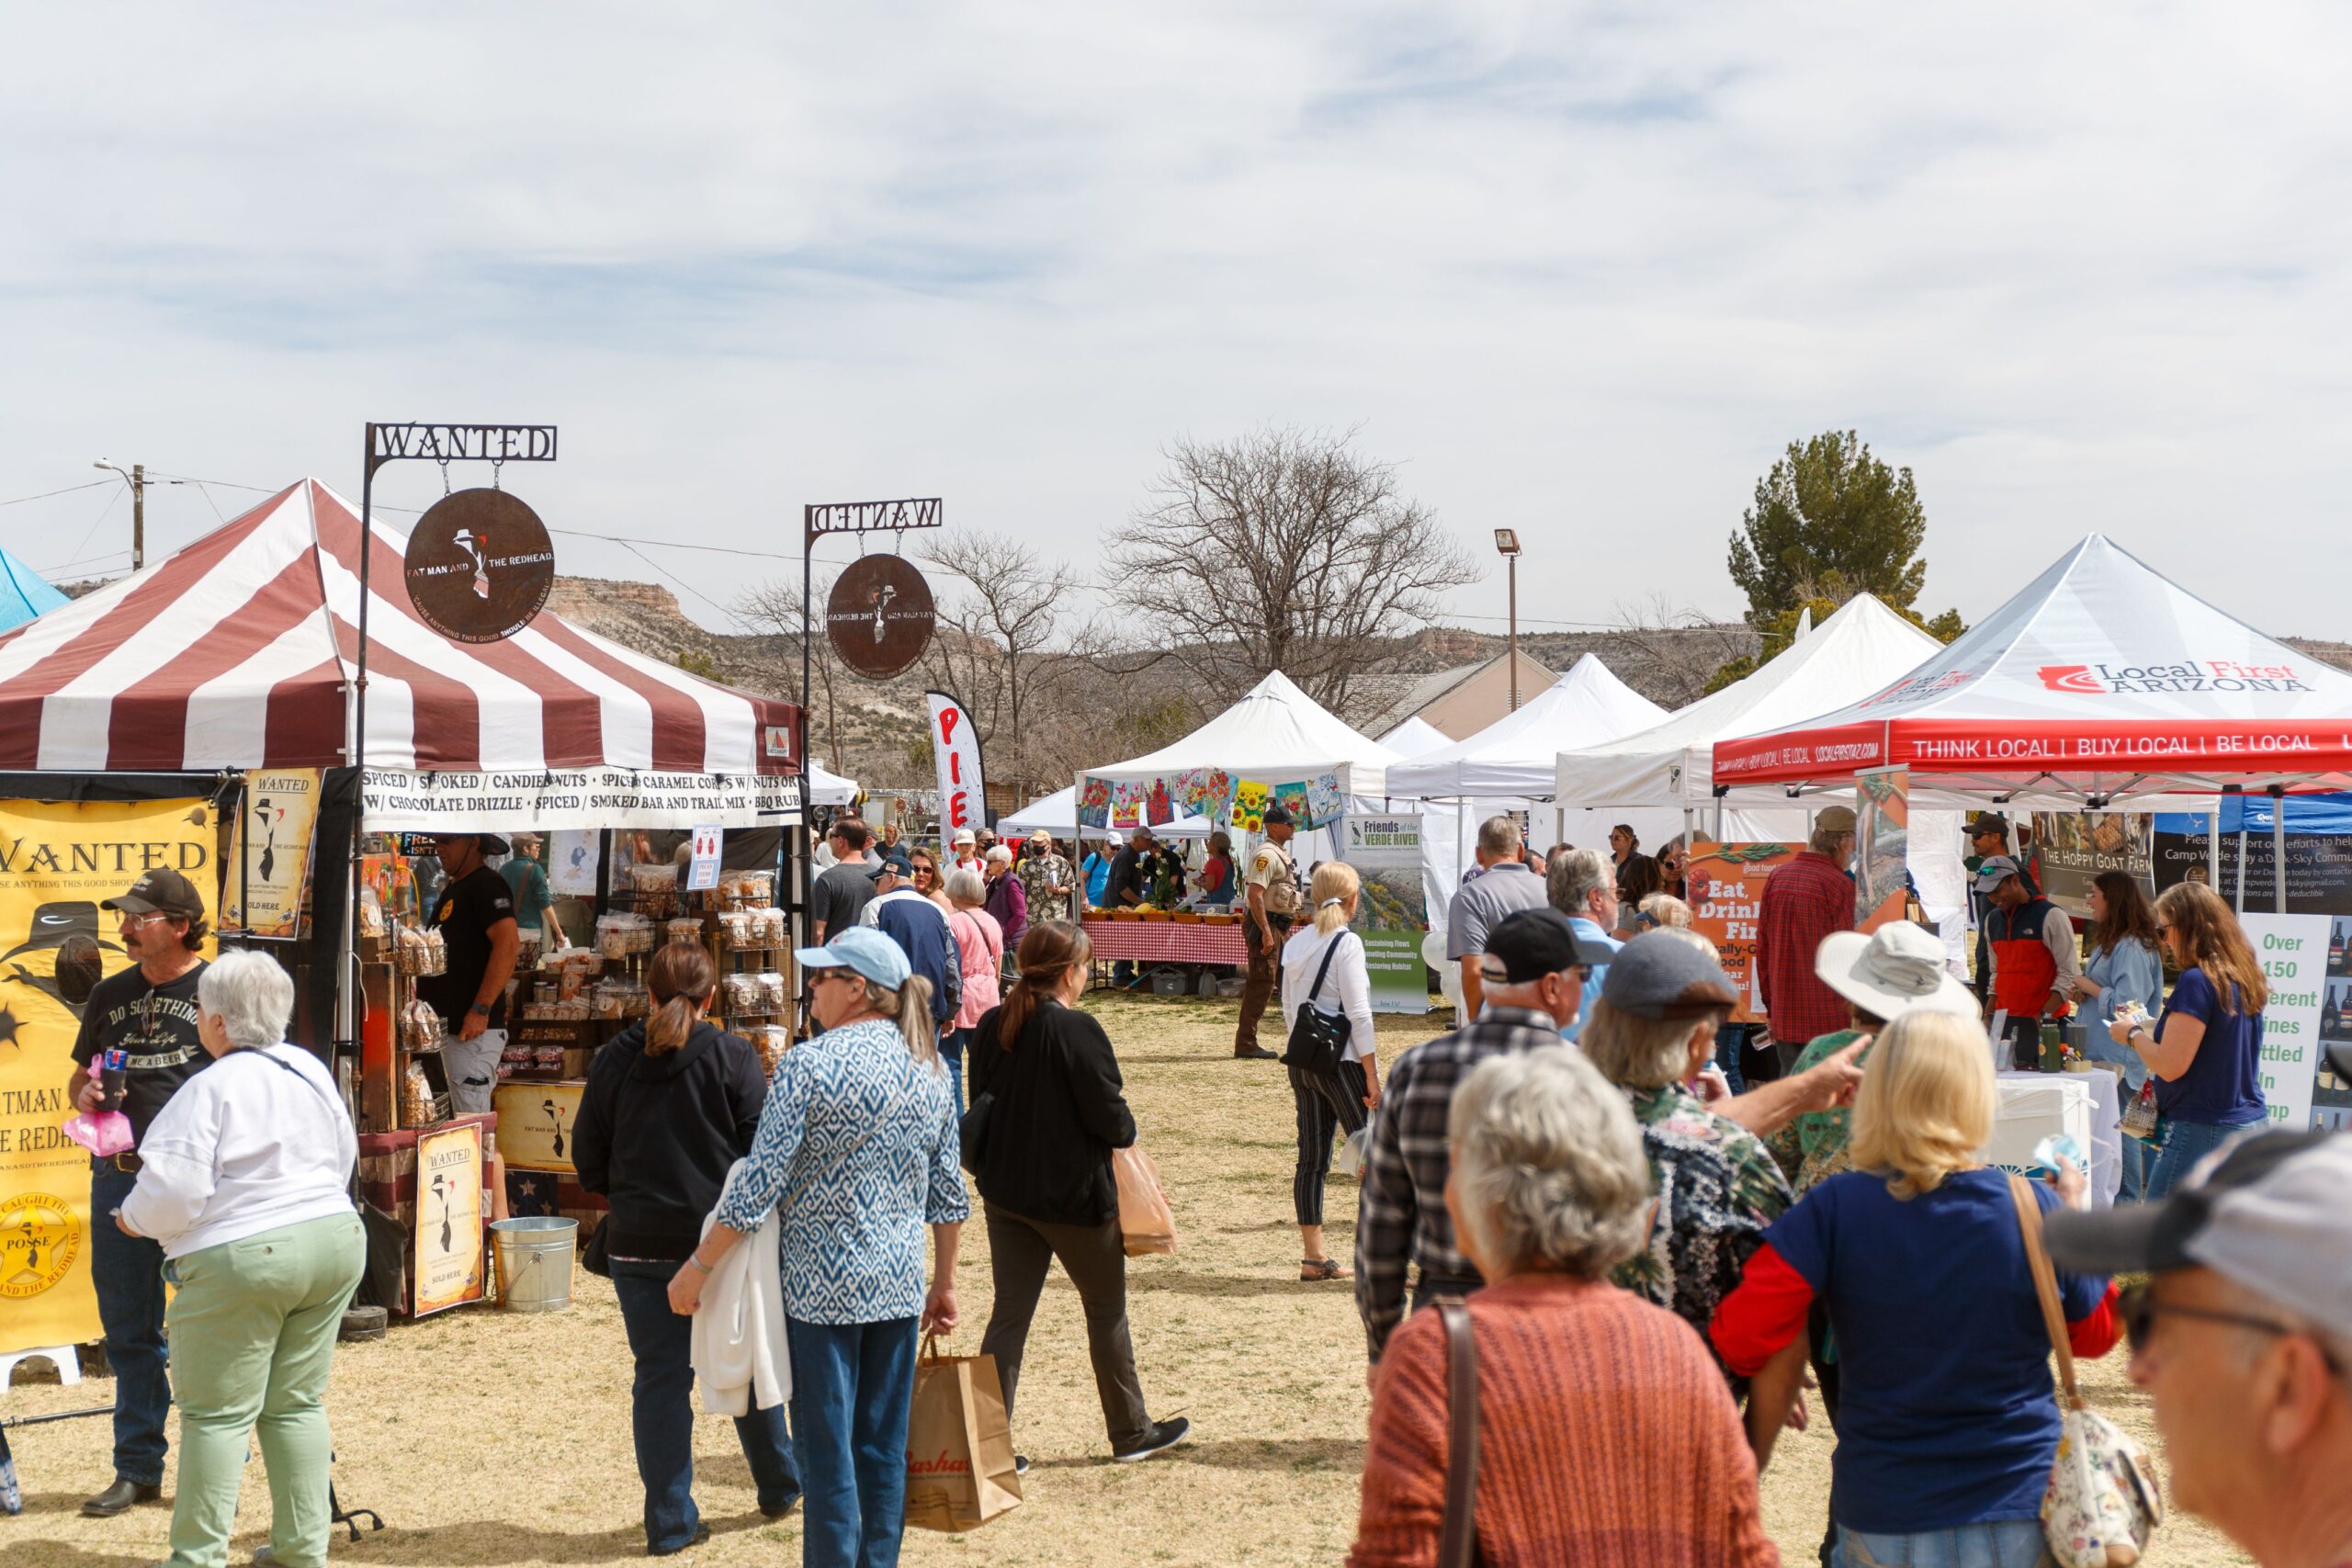 Town of Camp Verde preps for Pecan & Wine Festival on March 18 and 19